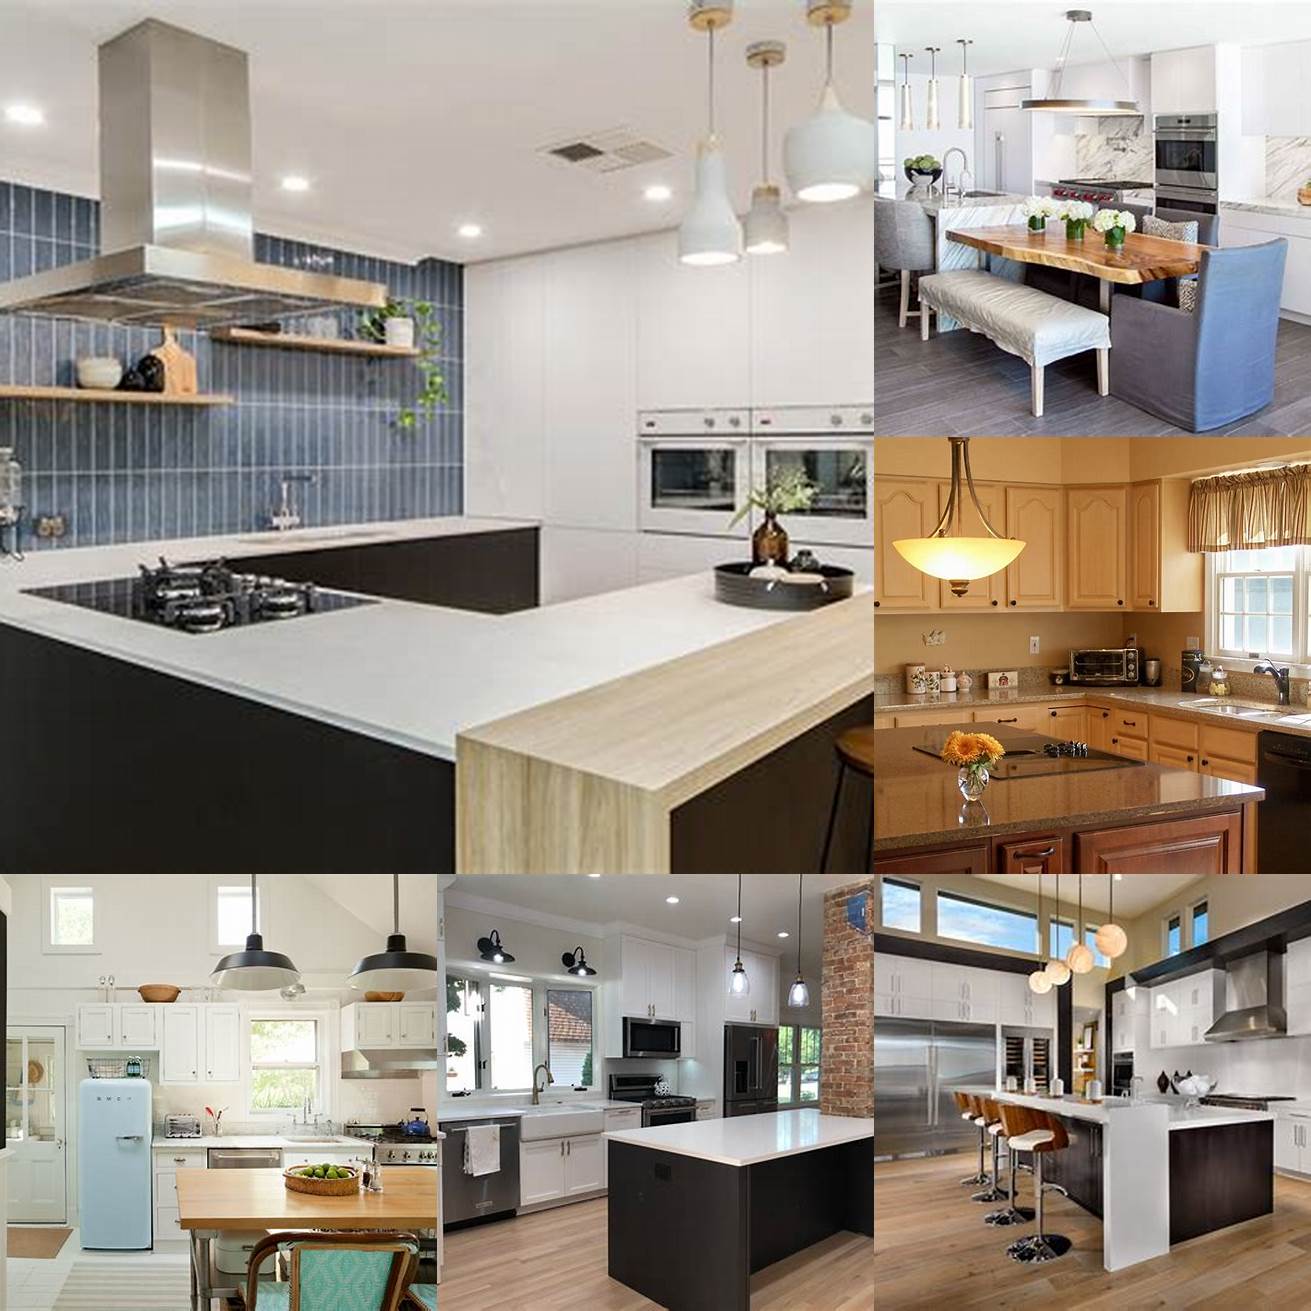 2 Plan for your needs and lifestyle Consider how you use your kitchen and what changes will make it more functional for you and your family